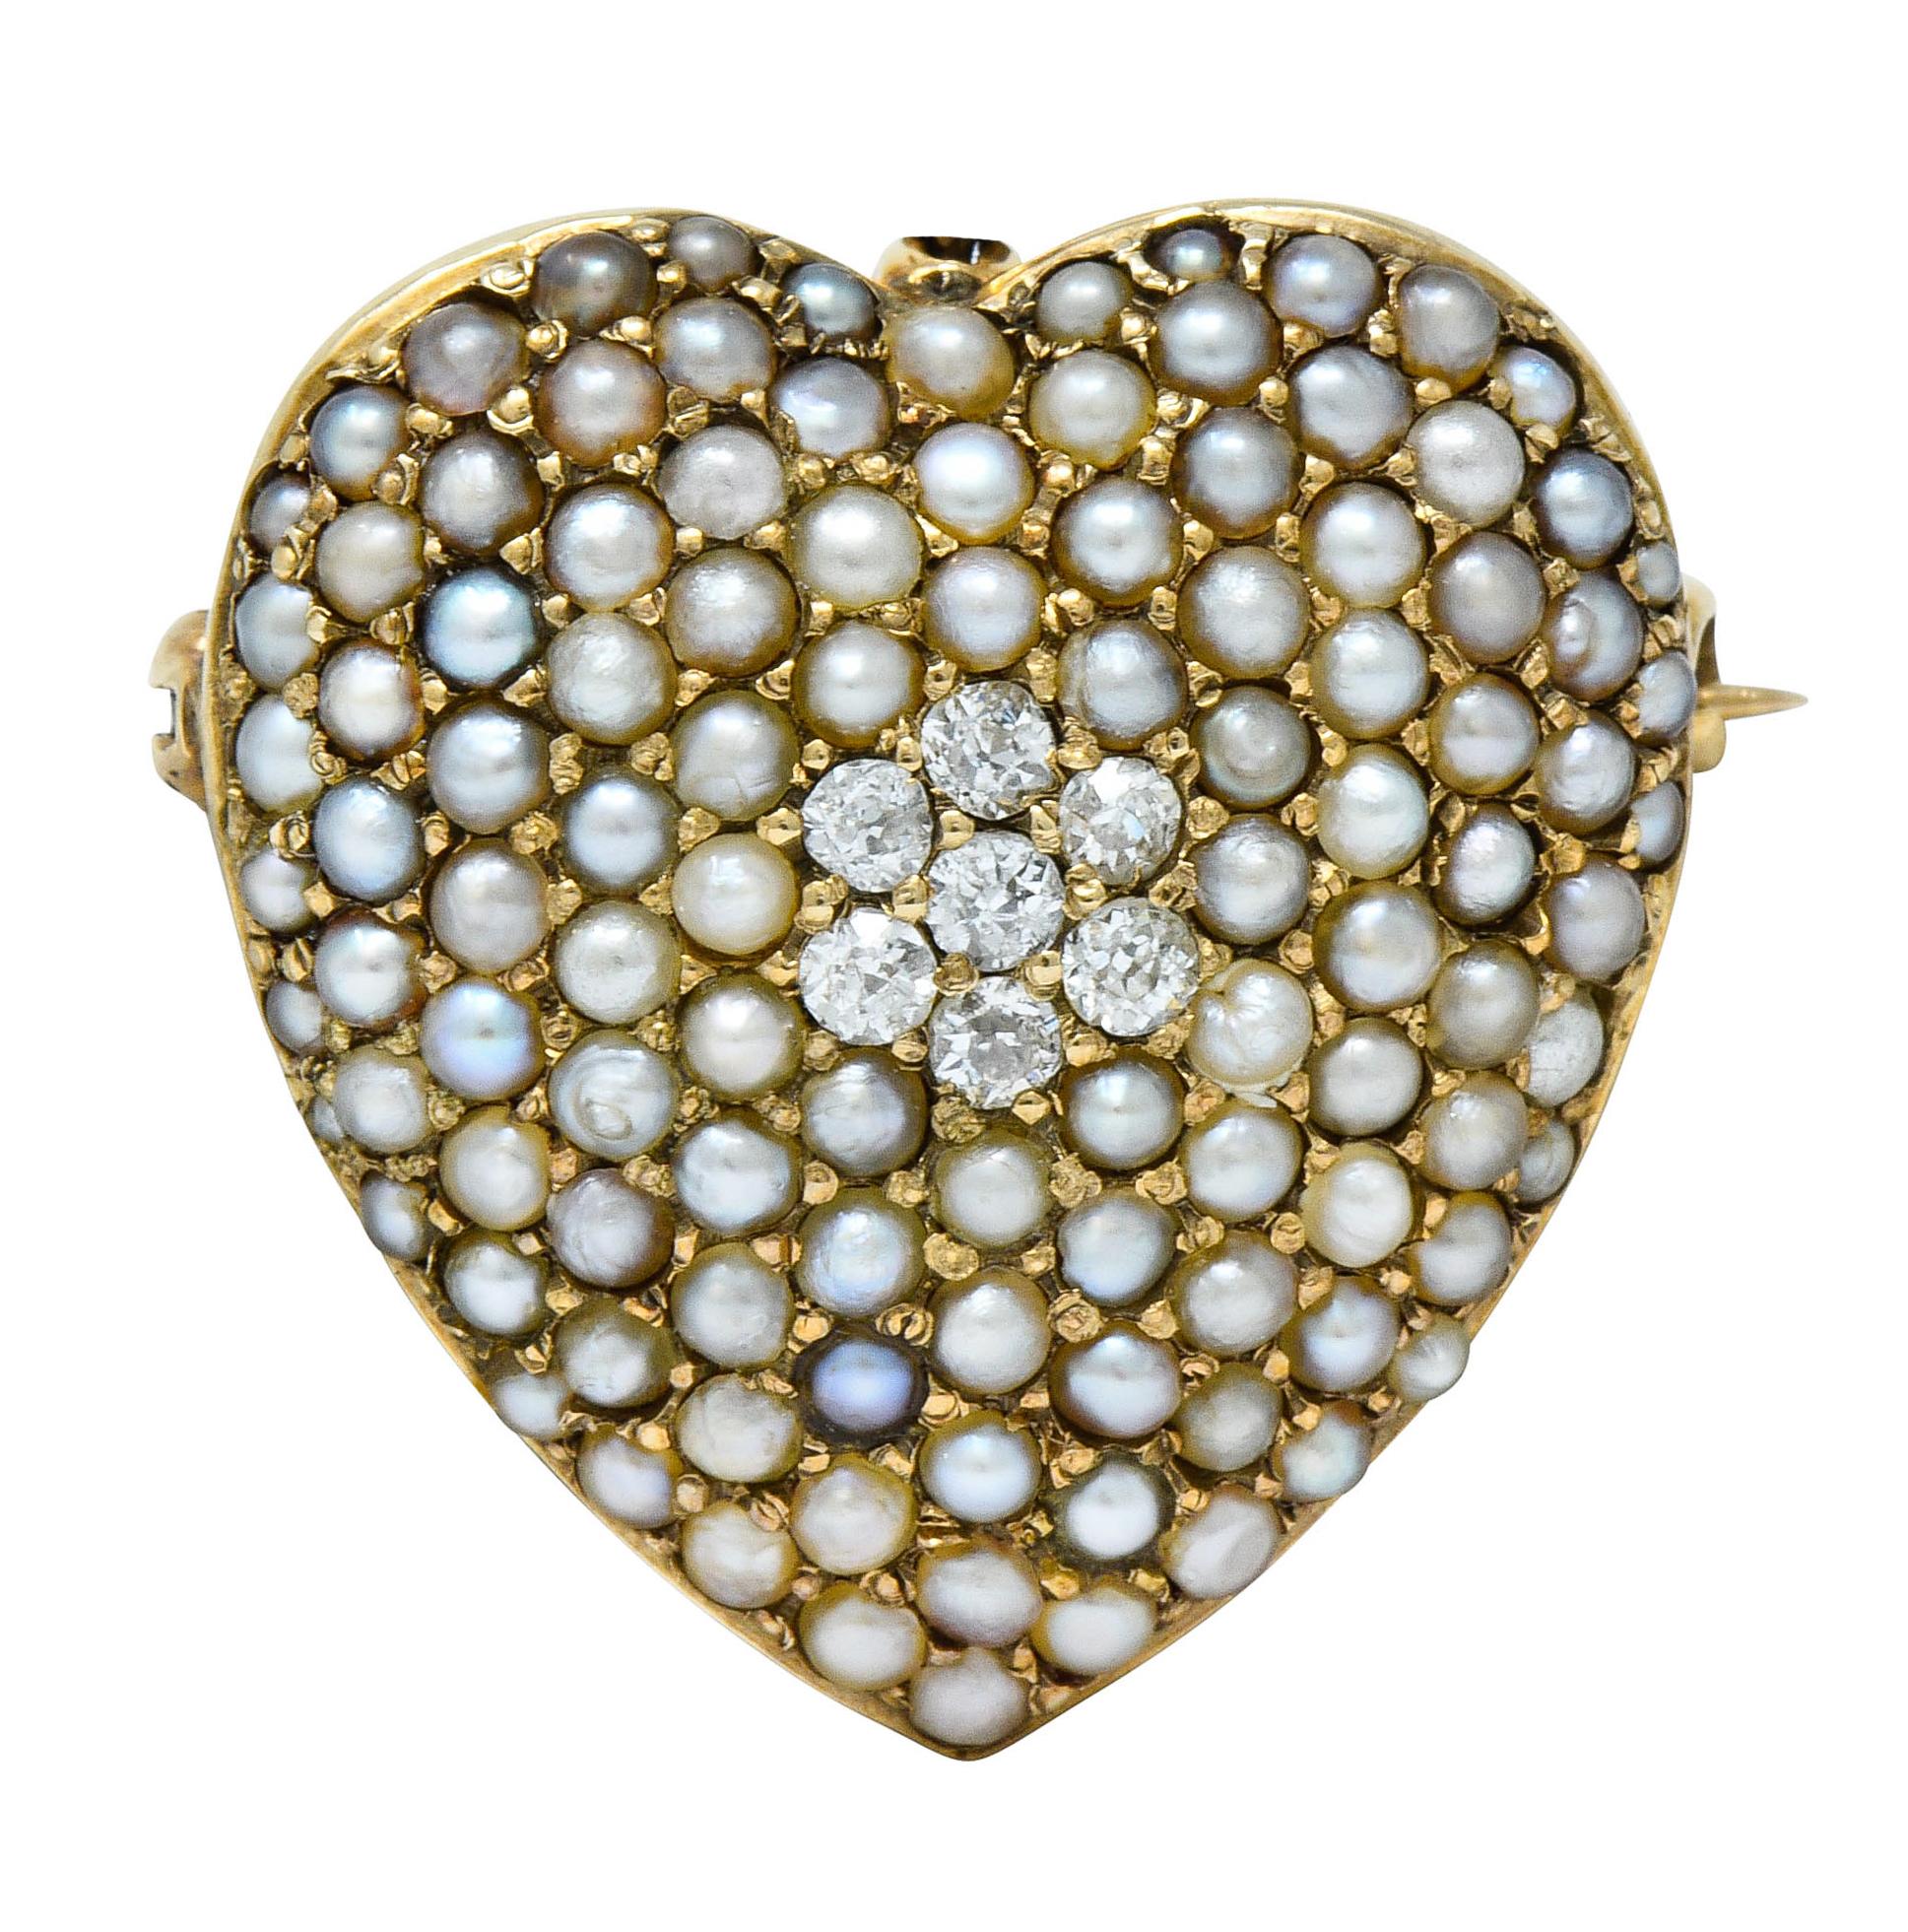 Designed as a heart pavéd throughout by 2.0 mm natural freshwater seed pearls, ranged in color and quality

Centering a cluster of old European cut diamonds weighing in total approximately 0.30 carat; I to J color with quality consistent with